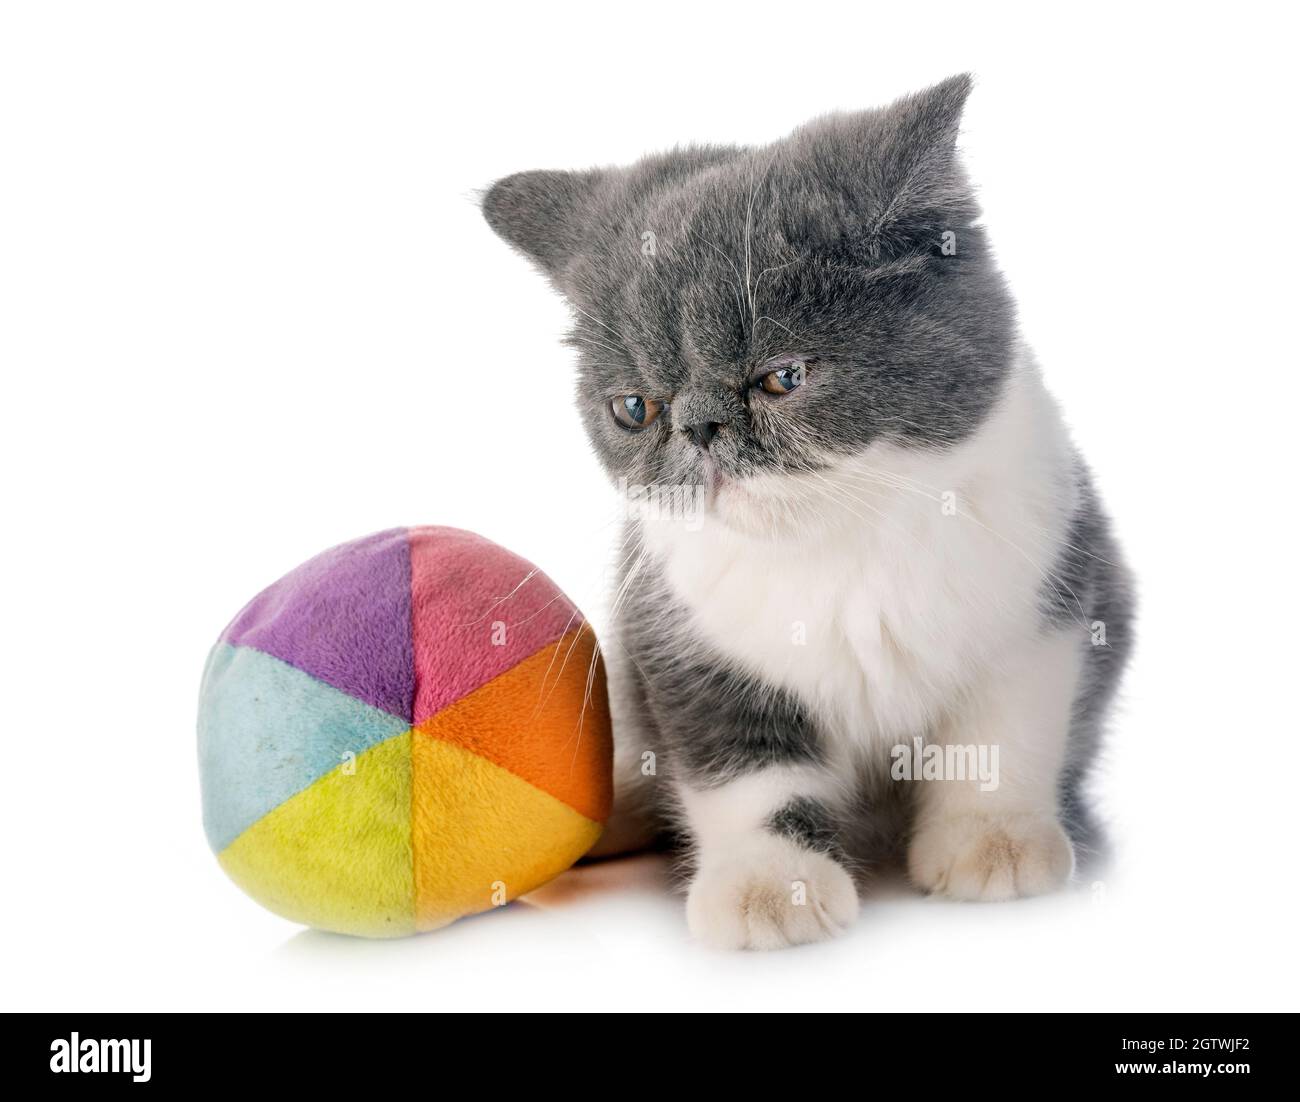 Cat Sitting By Ball Over White Background Stock Photo